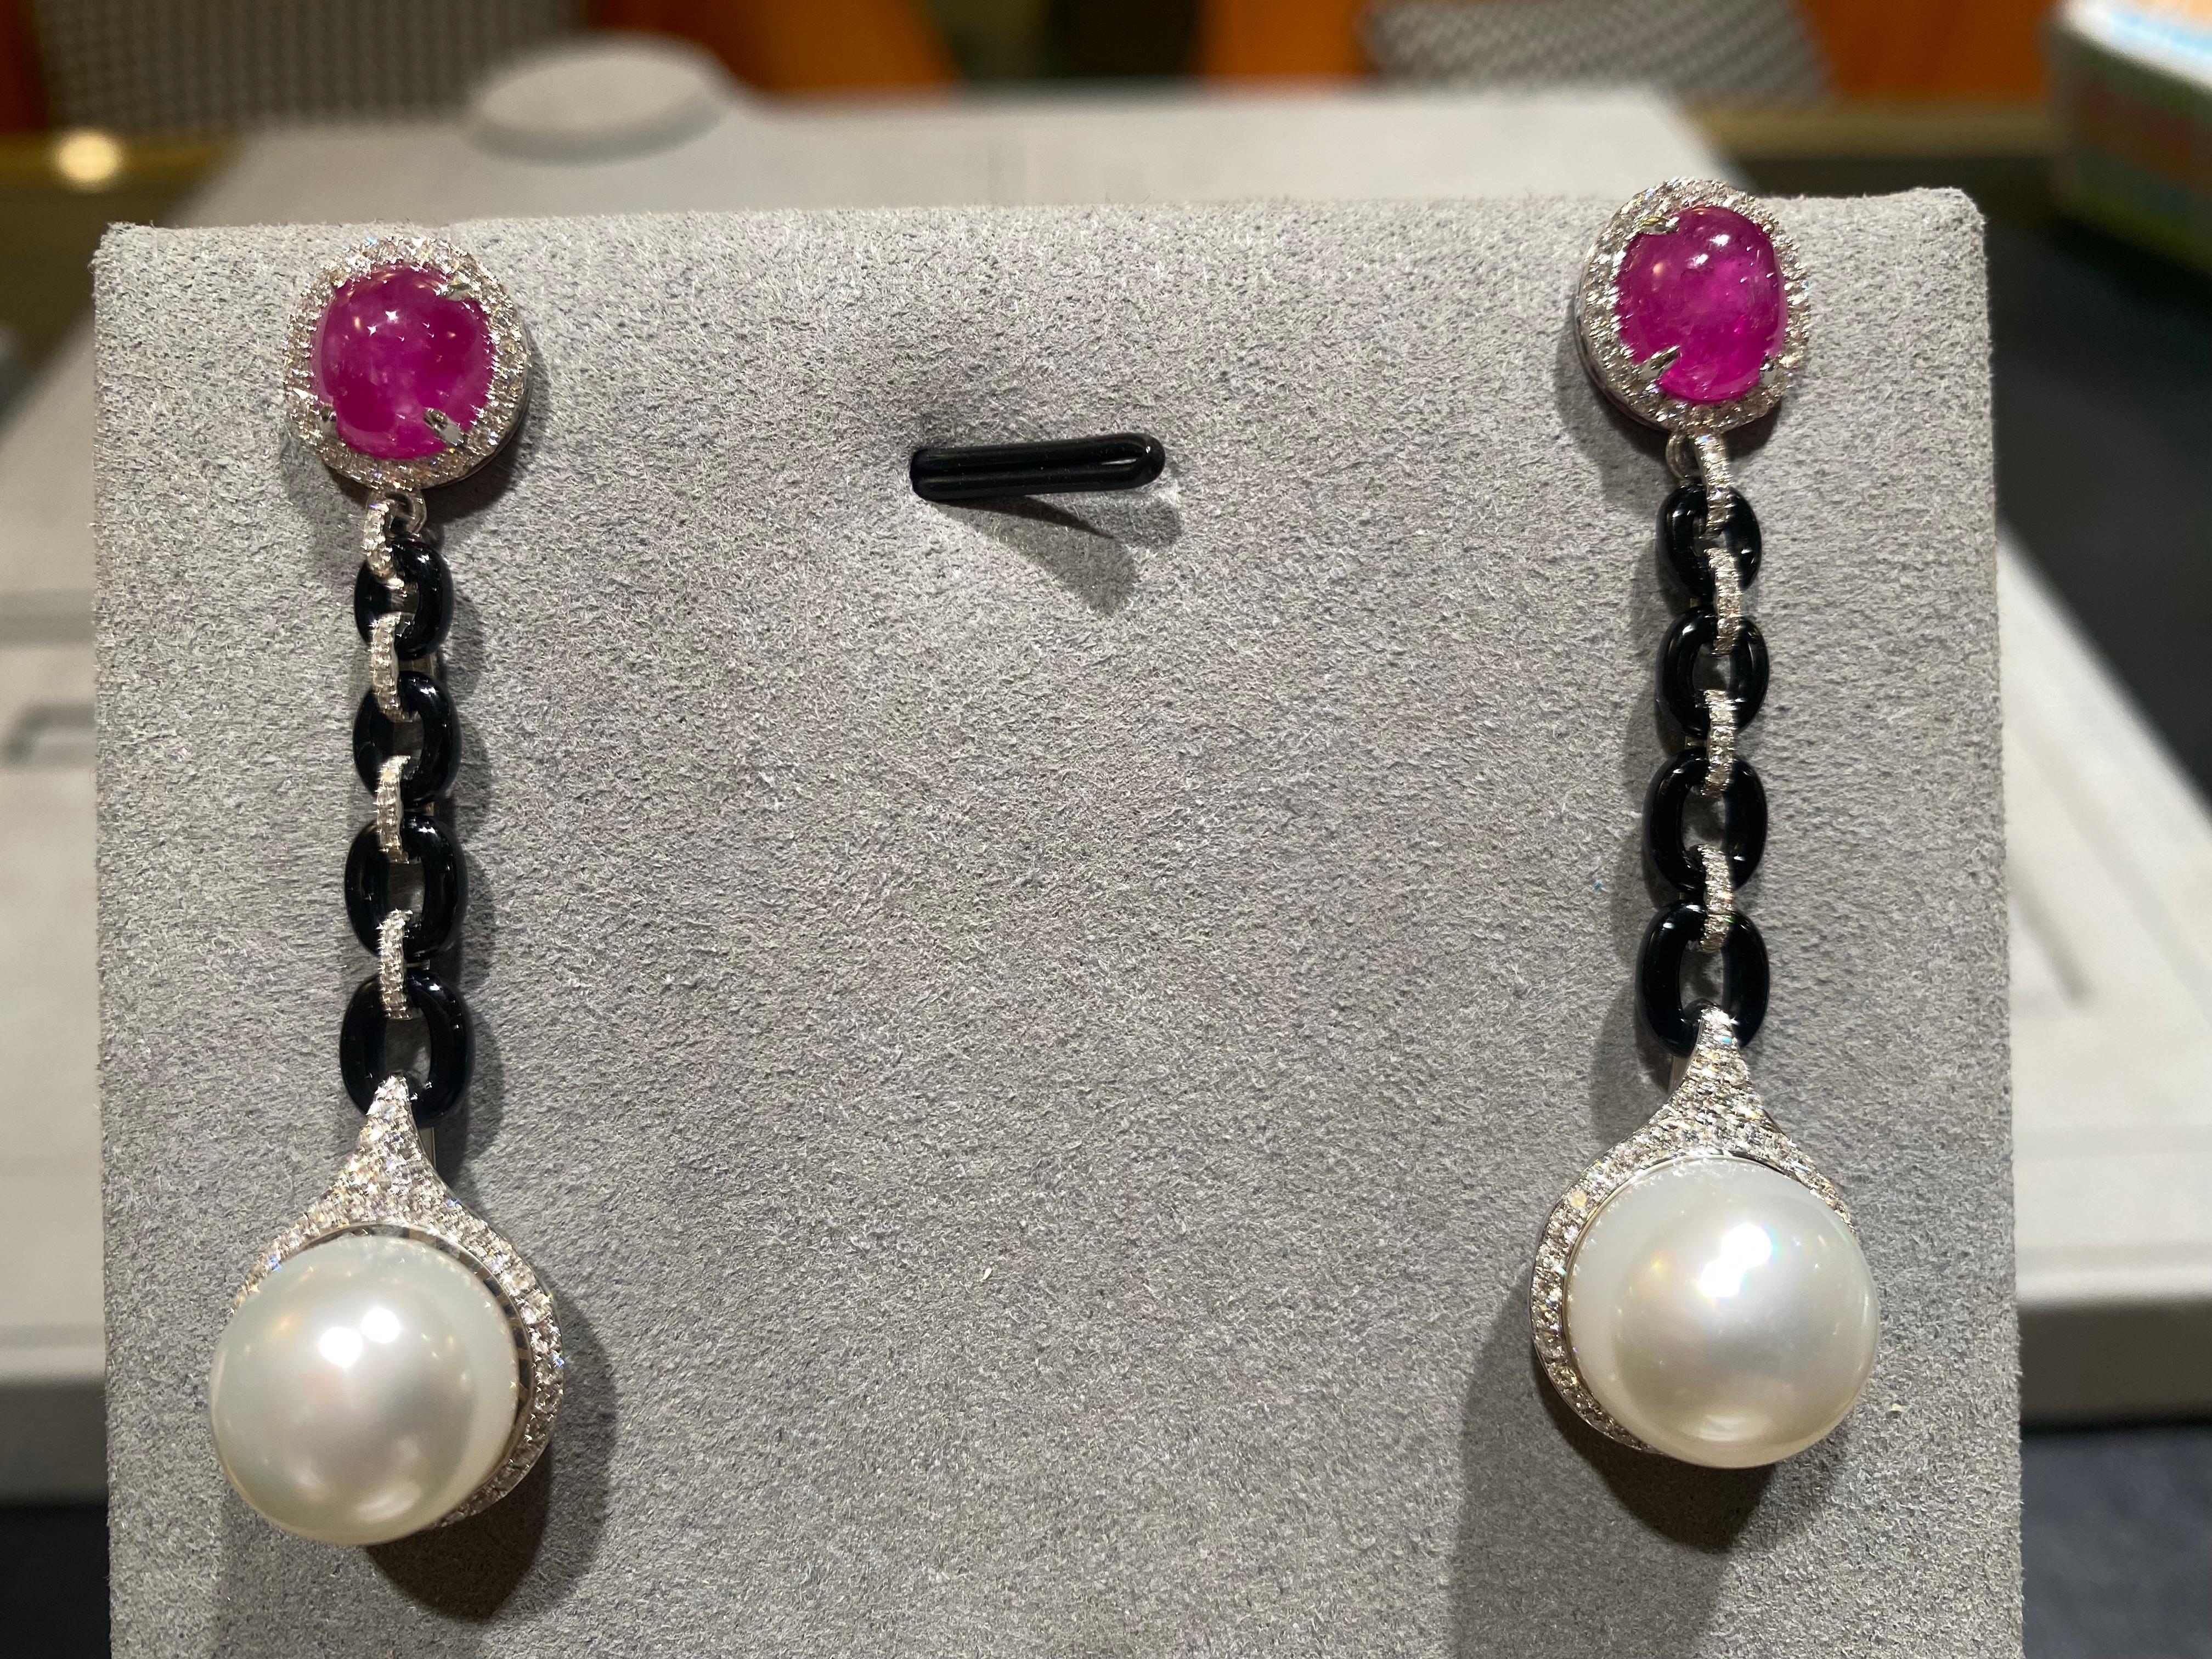  Australian white south sea pearl 12.4mm.
Ruby cabochon are traditional heated 6.78CT, 
Brilliant cut natural diamond in E/F colour, VS clarity total weight 1.348CT.
This earring is set in 18K white gold.
Black onyx is natural and hand crafted.
this